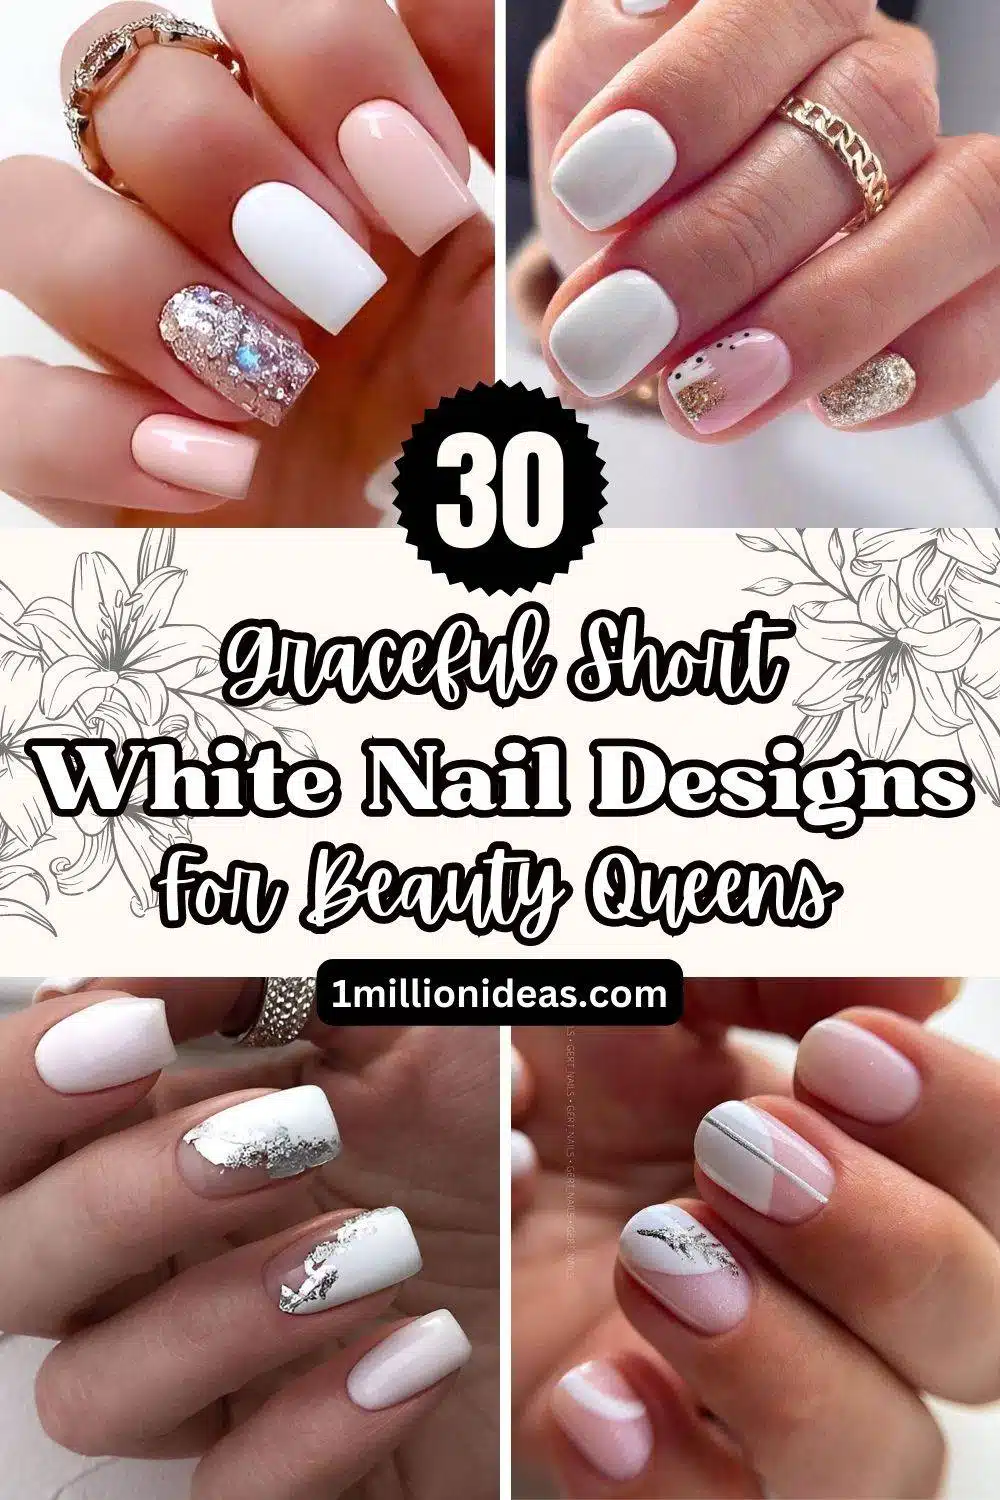 30 Graceful Short White Nail Designs For Beauty Queens - 191